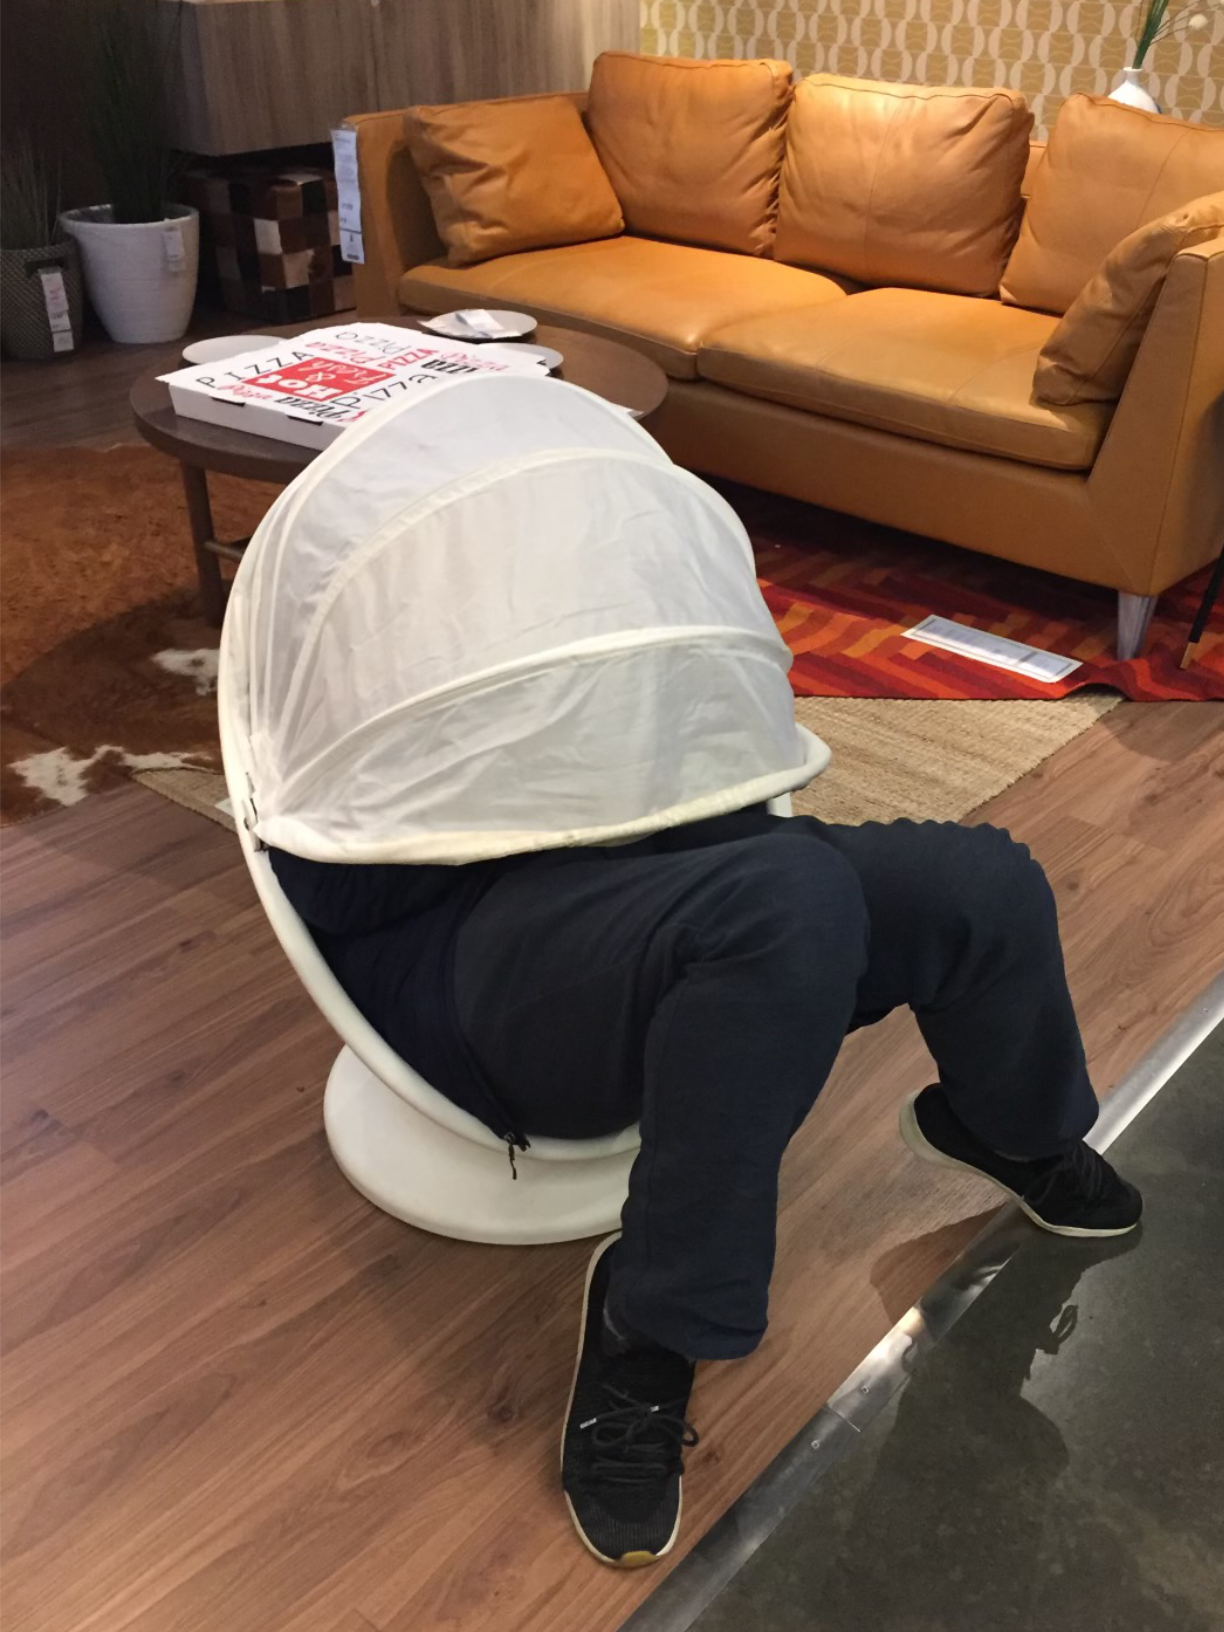 photo of a teen sitting in a pod chair in Ikea, face obscured